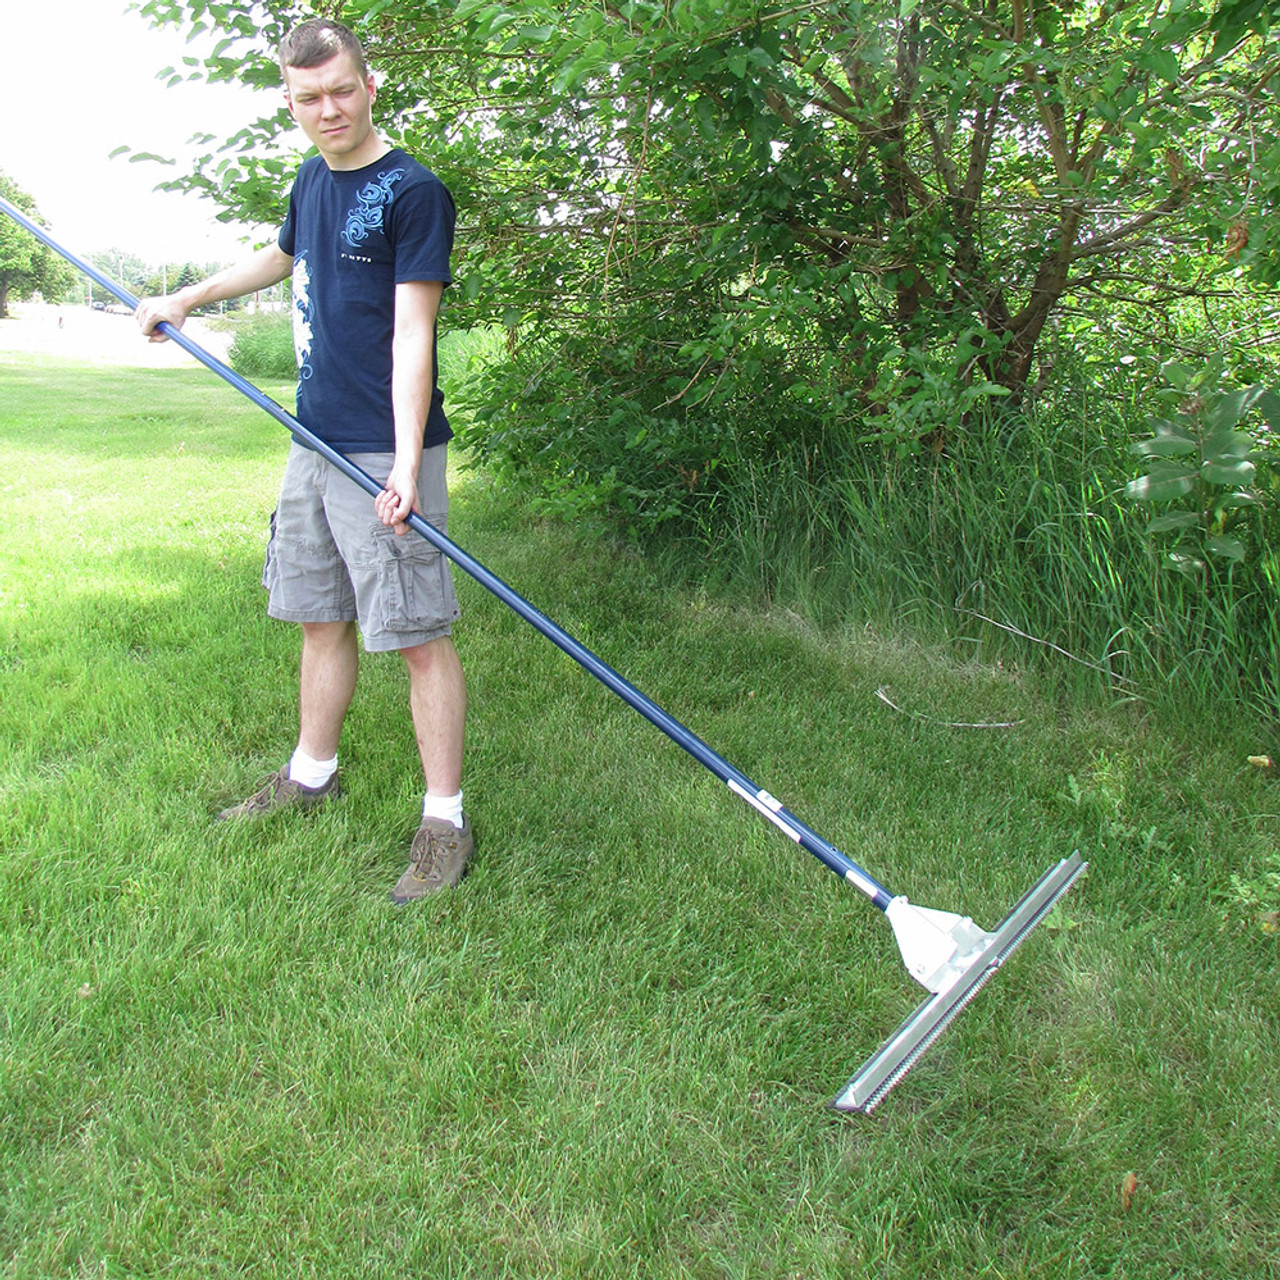 Serrated Lake Weed Cutter | The Weeders Digest